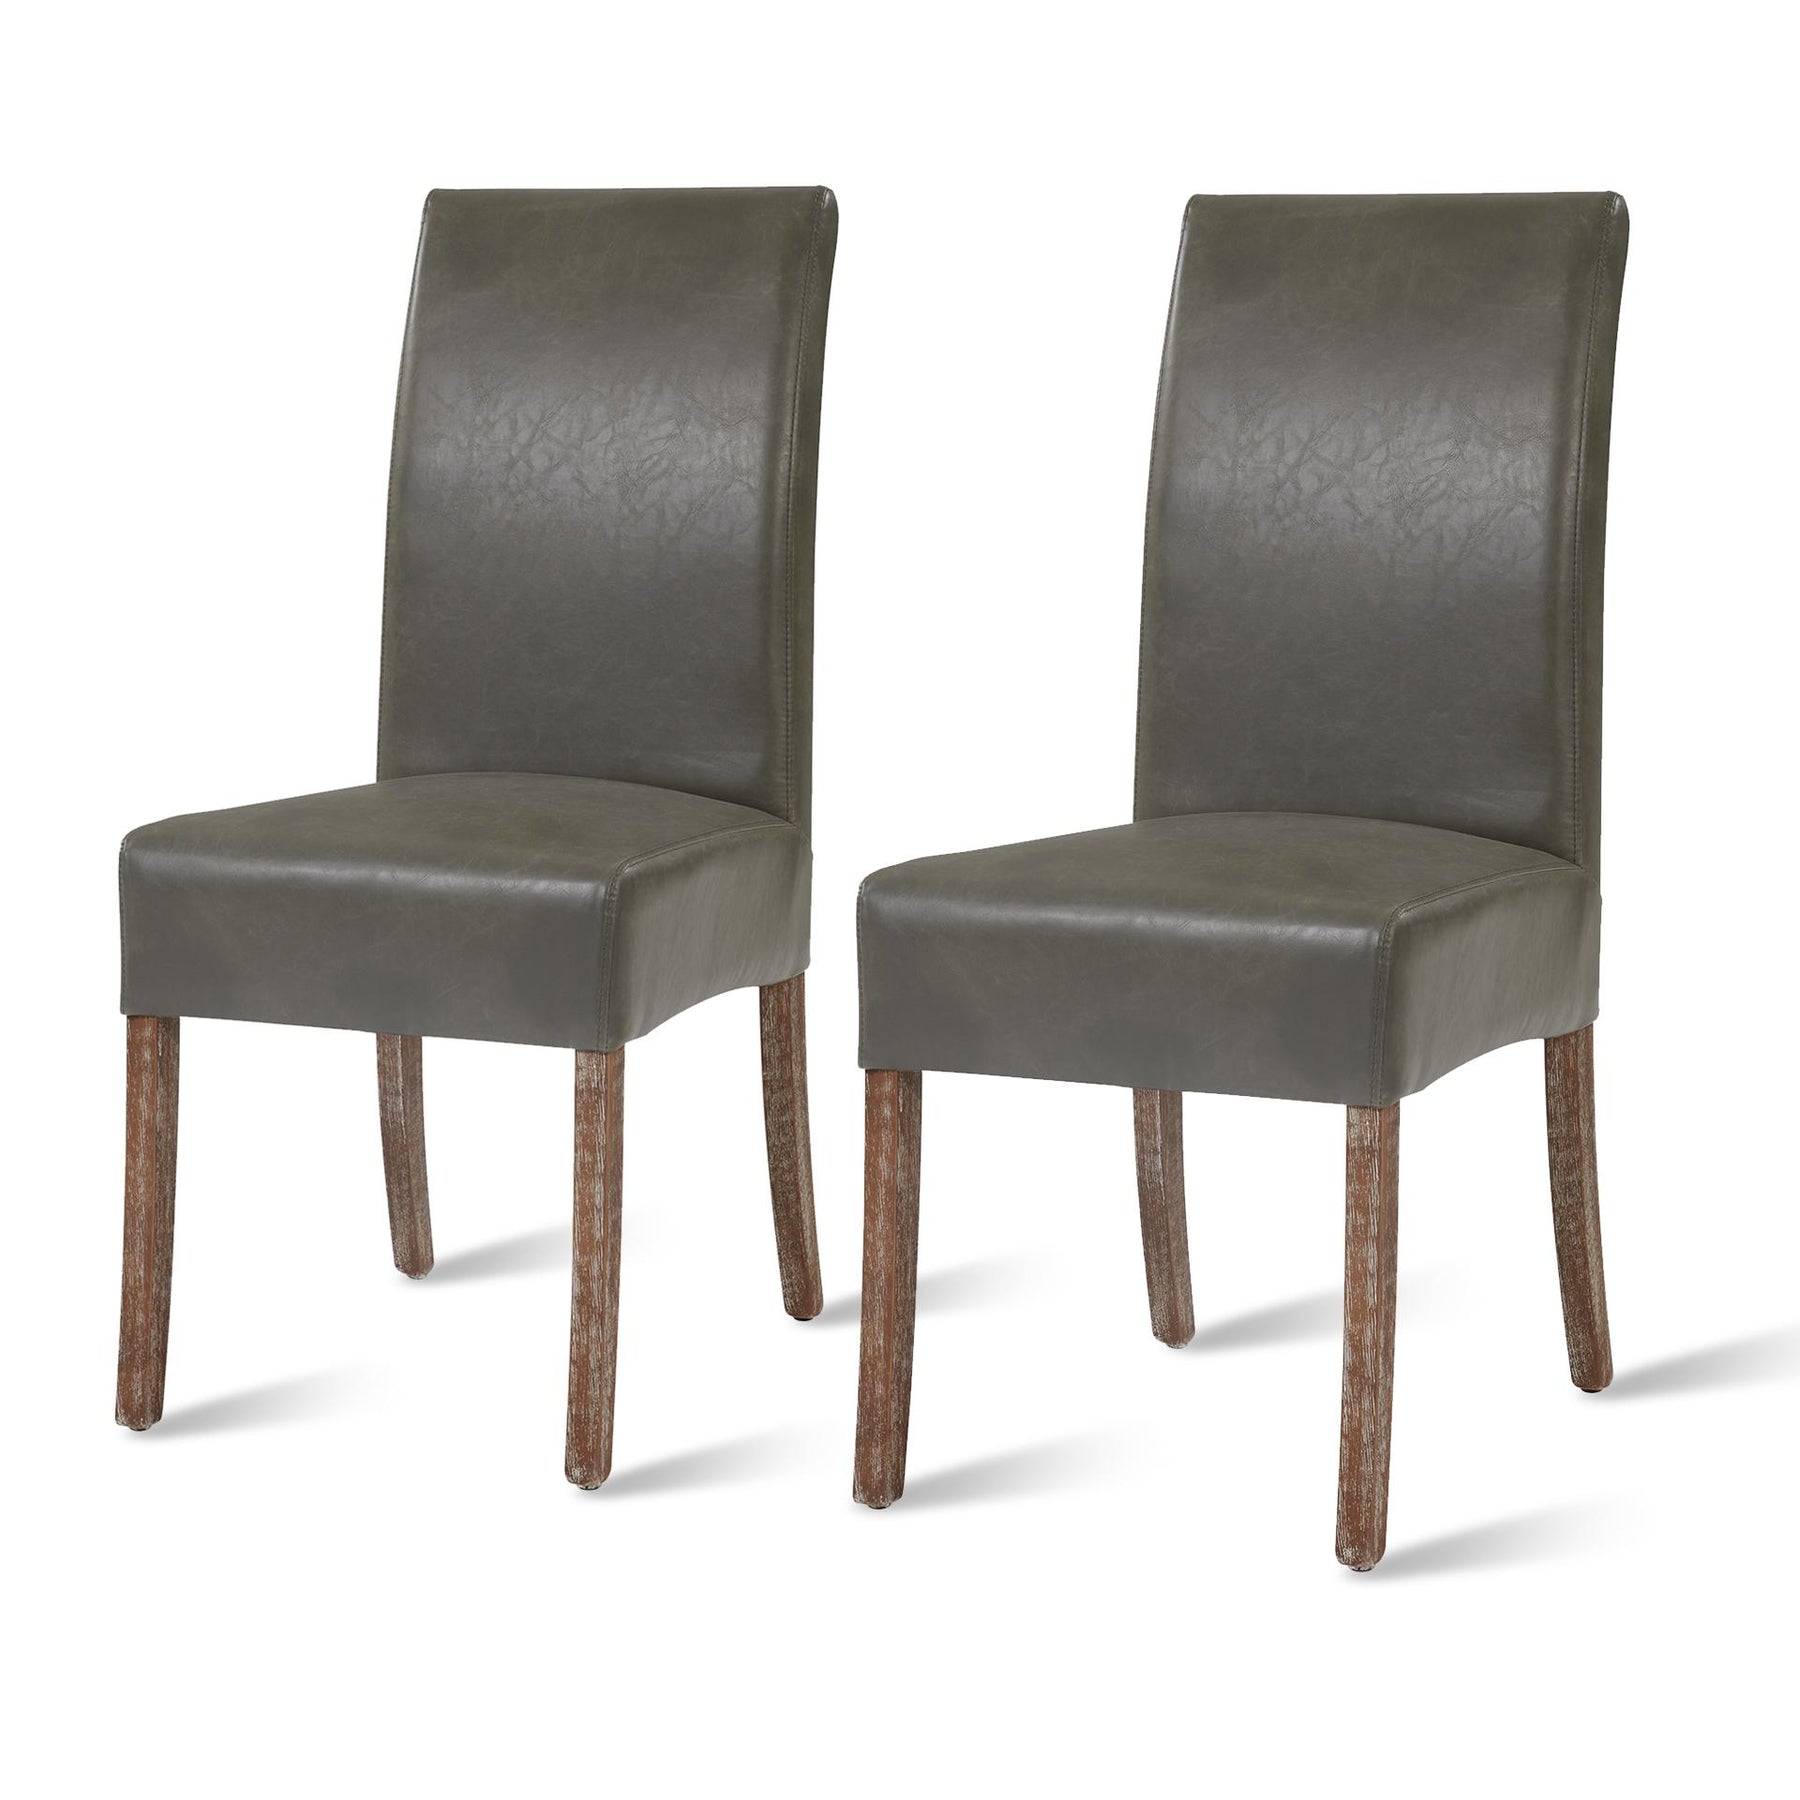 Valencia Bonded Leather Chair (Set of 2) by New Pacific Direct - 108239B